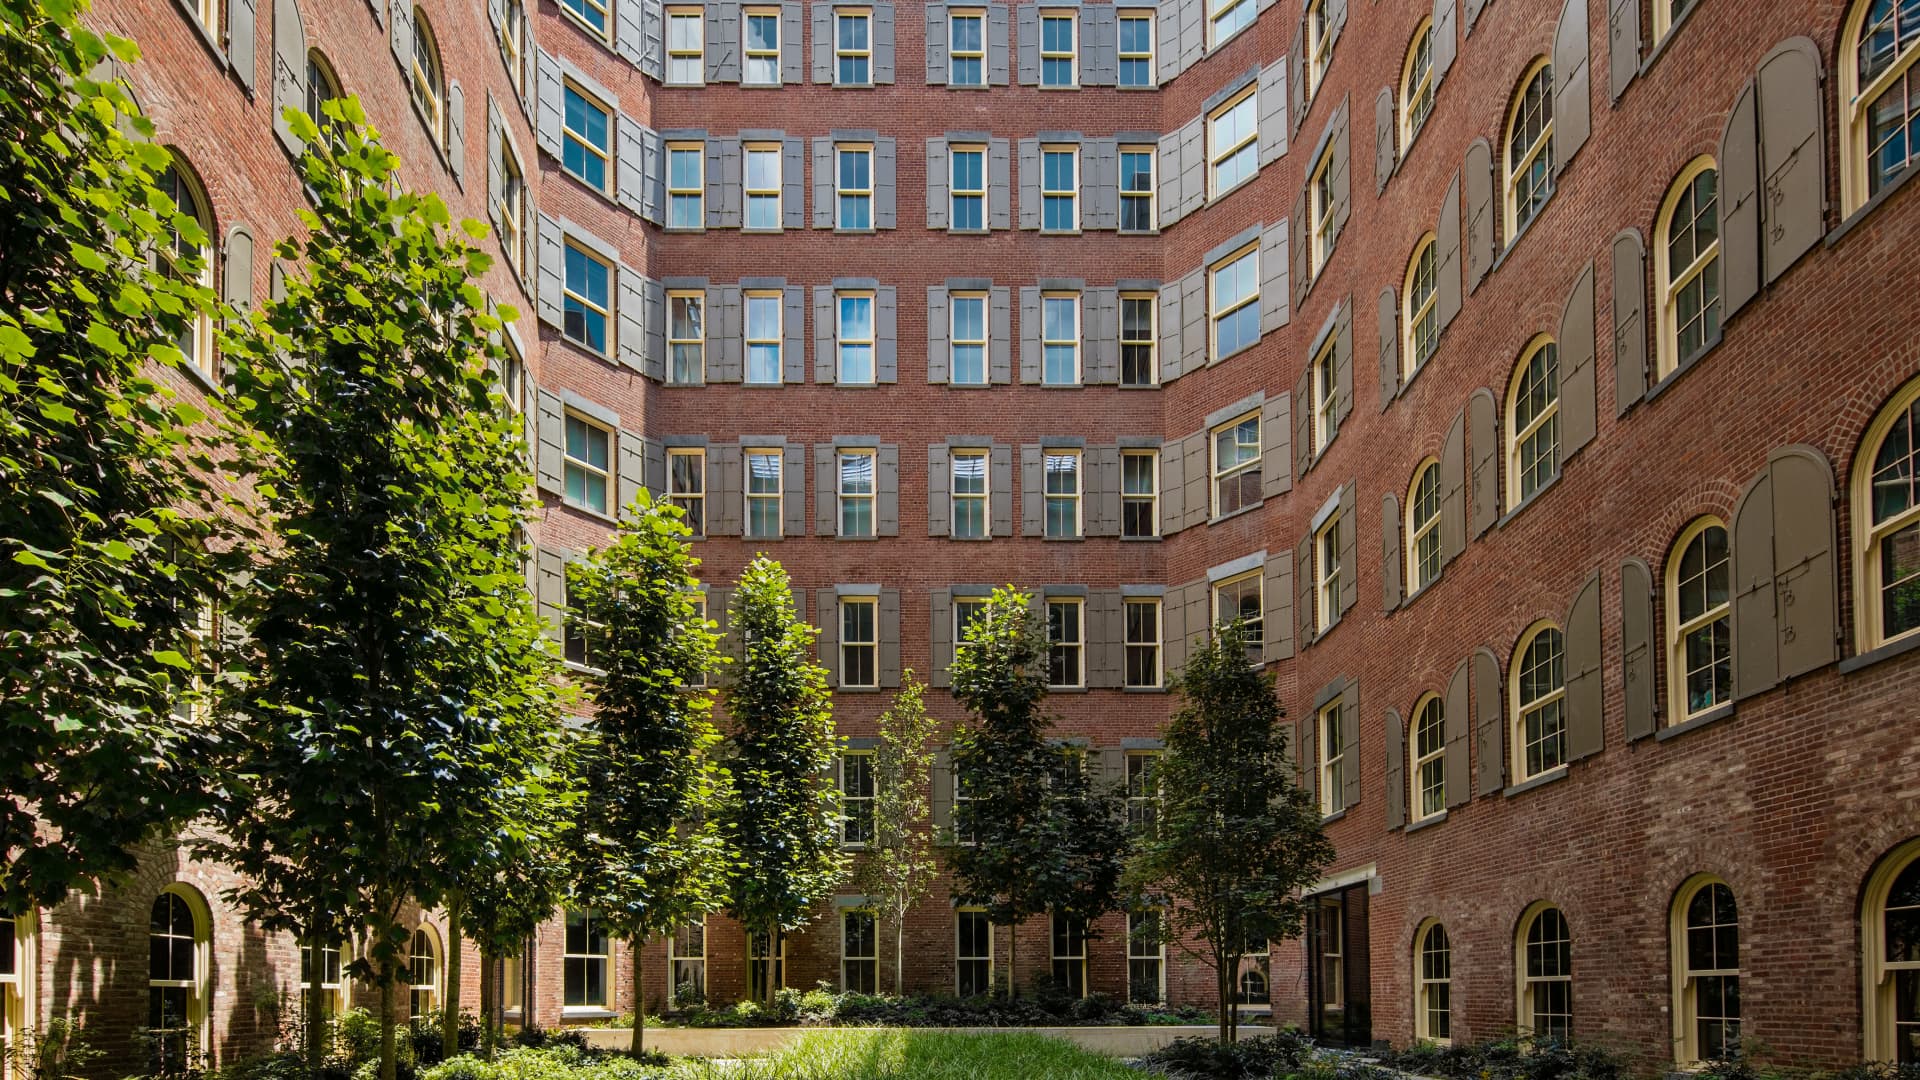 443 Greenwich Street was designed with an indoor courtyard, which is rare for buildings in New York City.